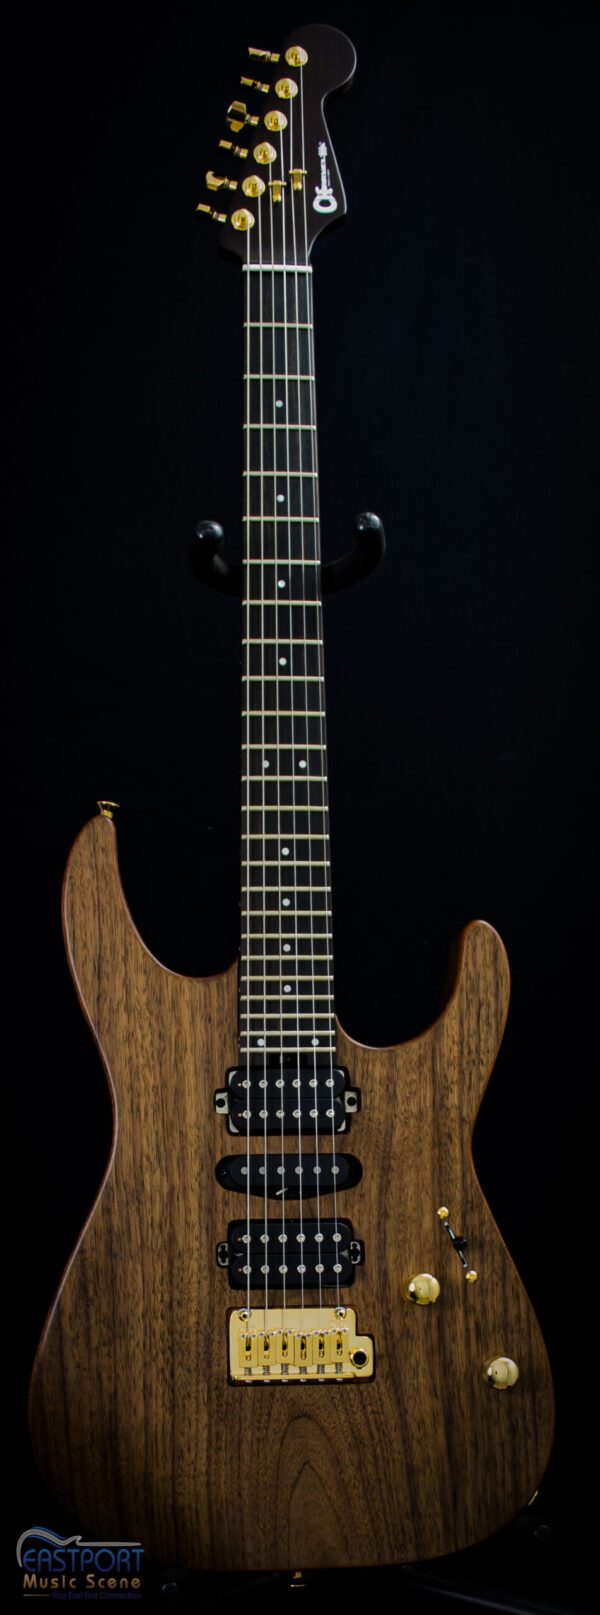 A guitar with a black string and wood finish.